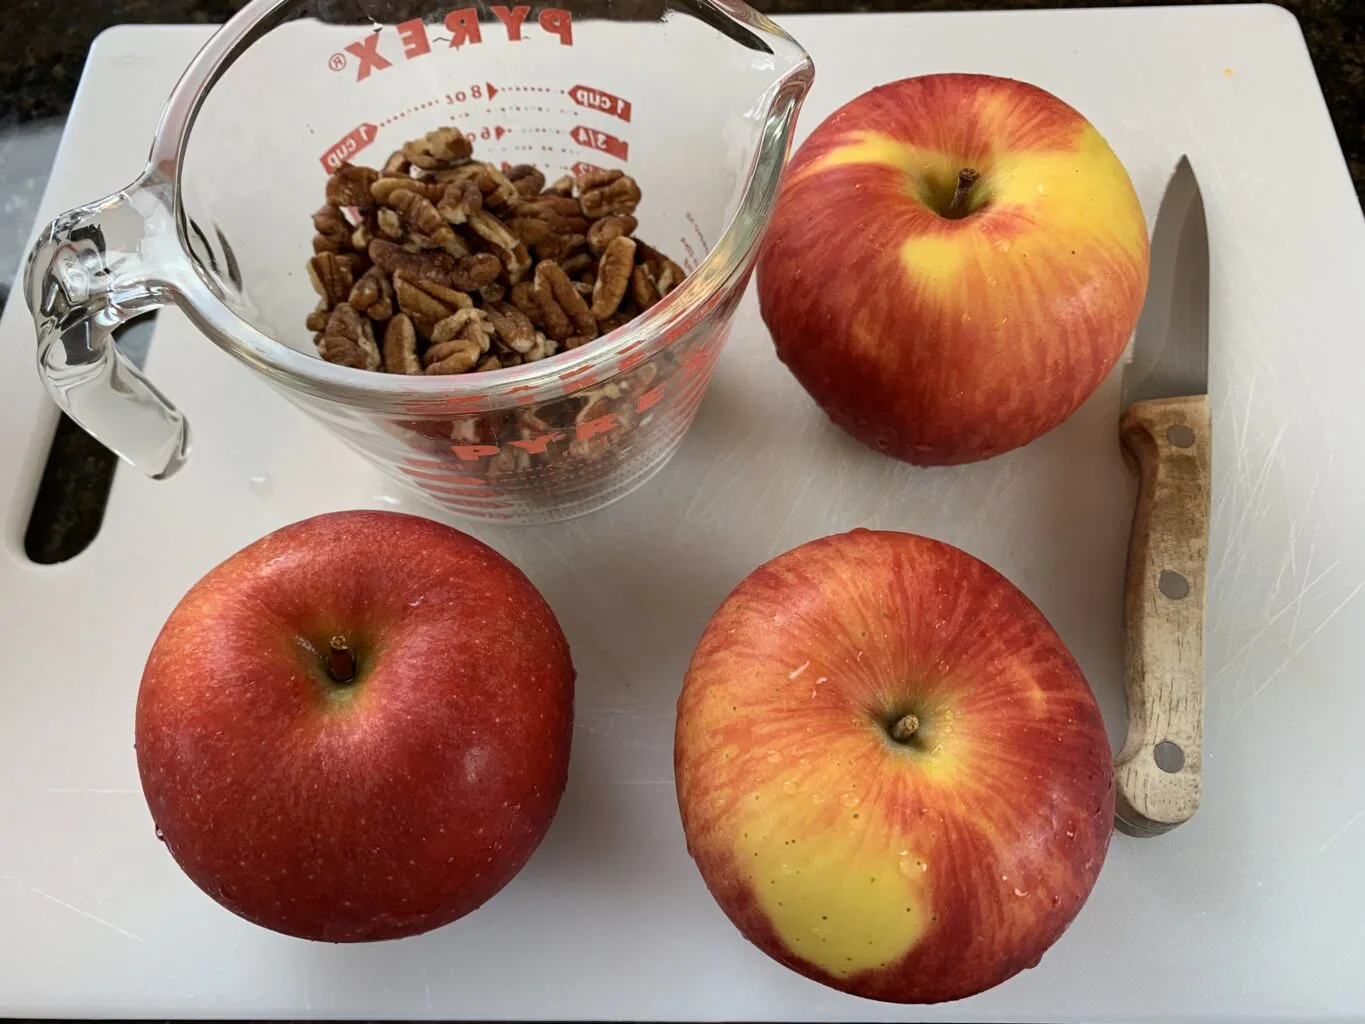 Apples, nuts and knife on cutting board